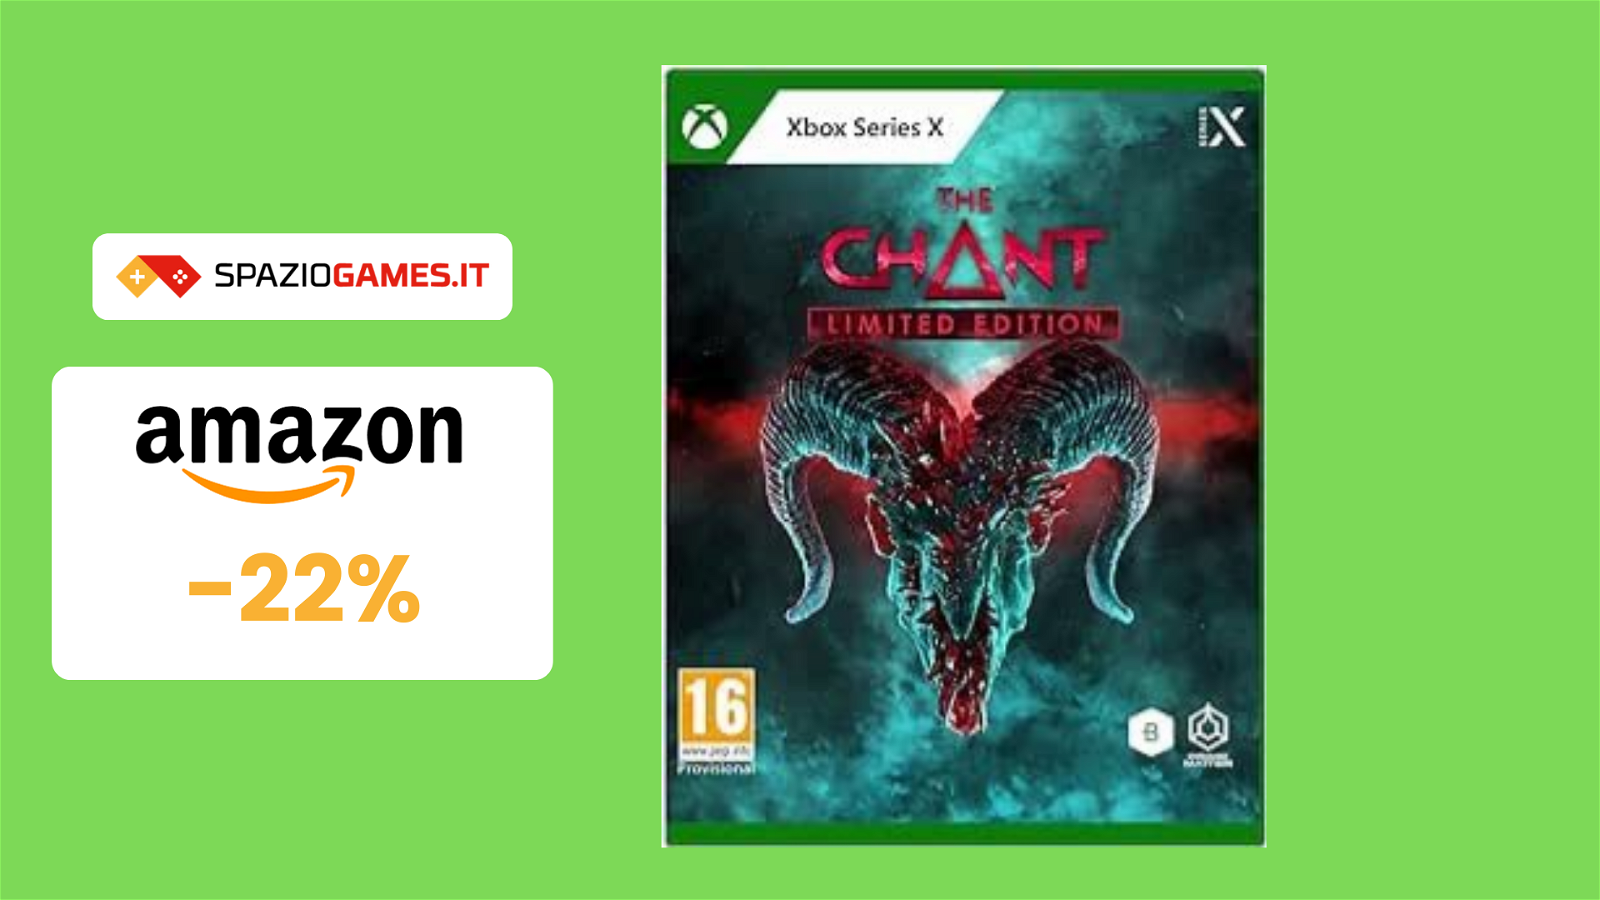 The Chant - Limited Edition per Xbox Series X a soli 12€!